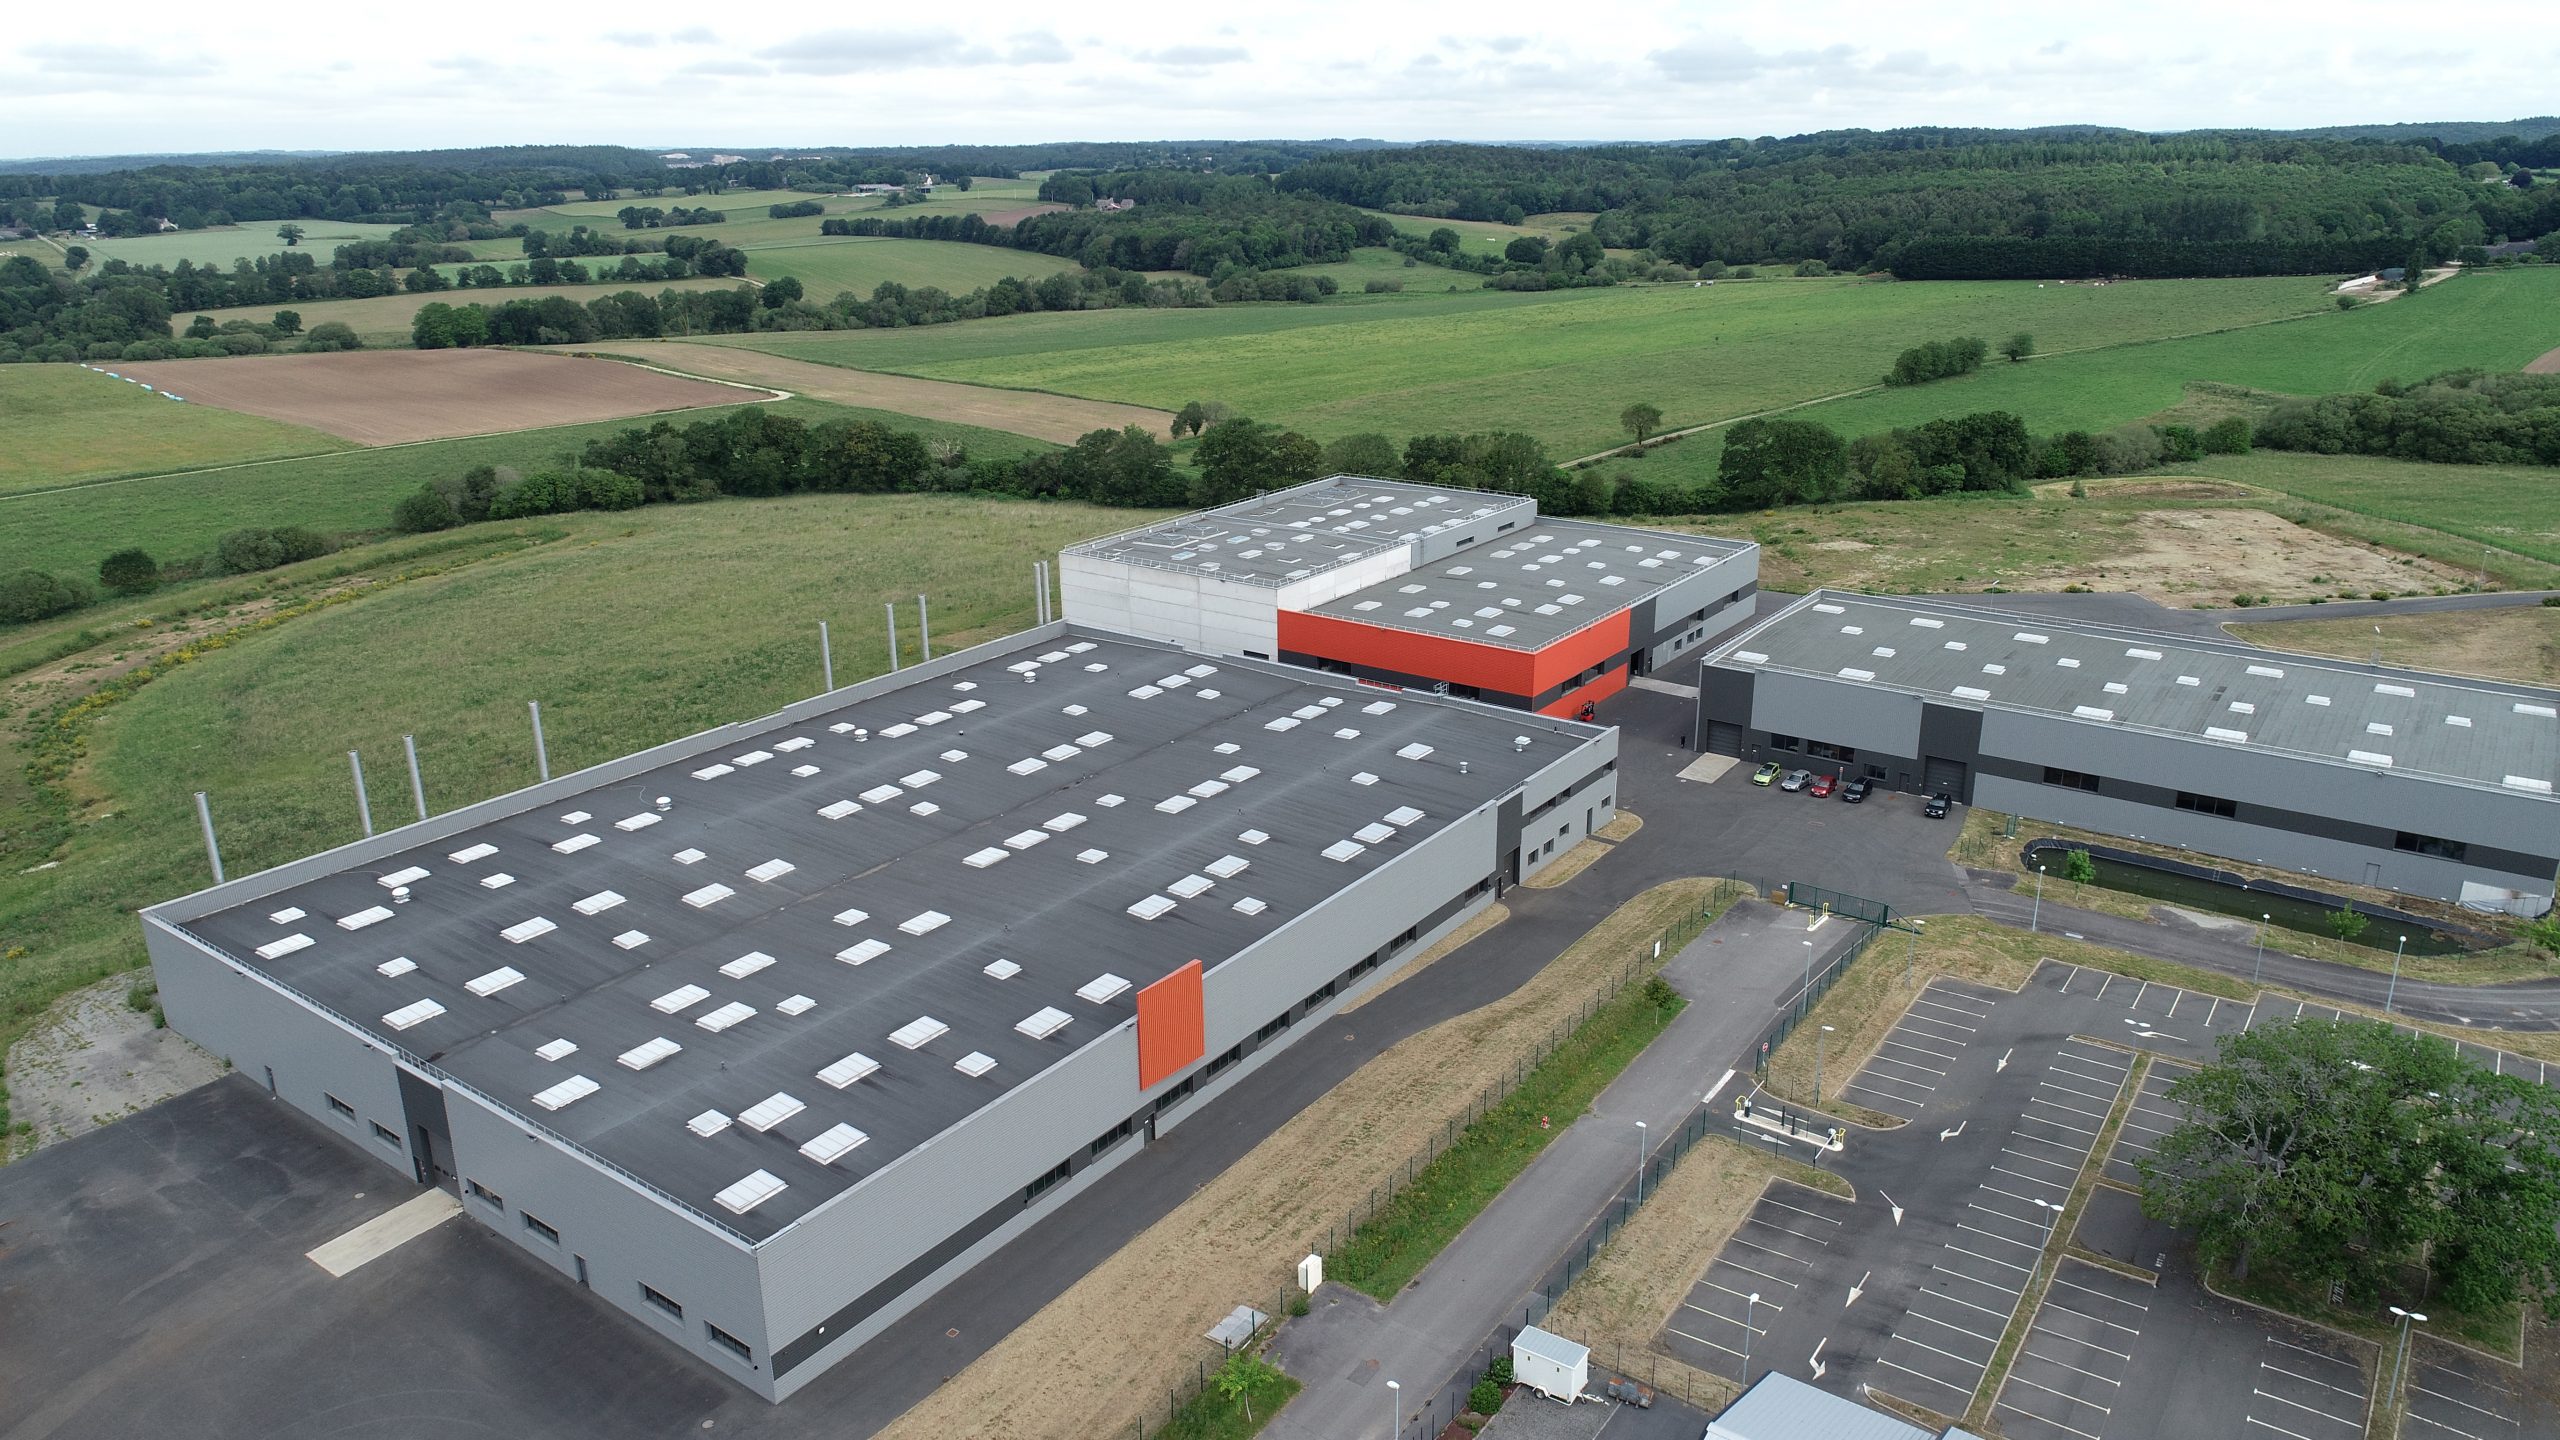 Apply Carbon's facility in Plouay